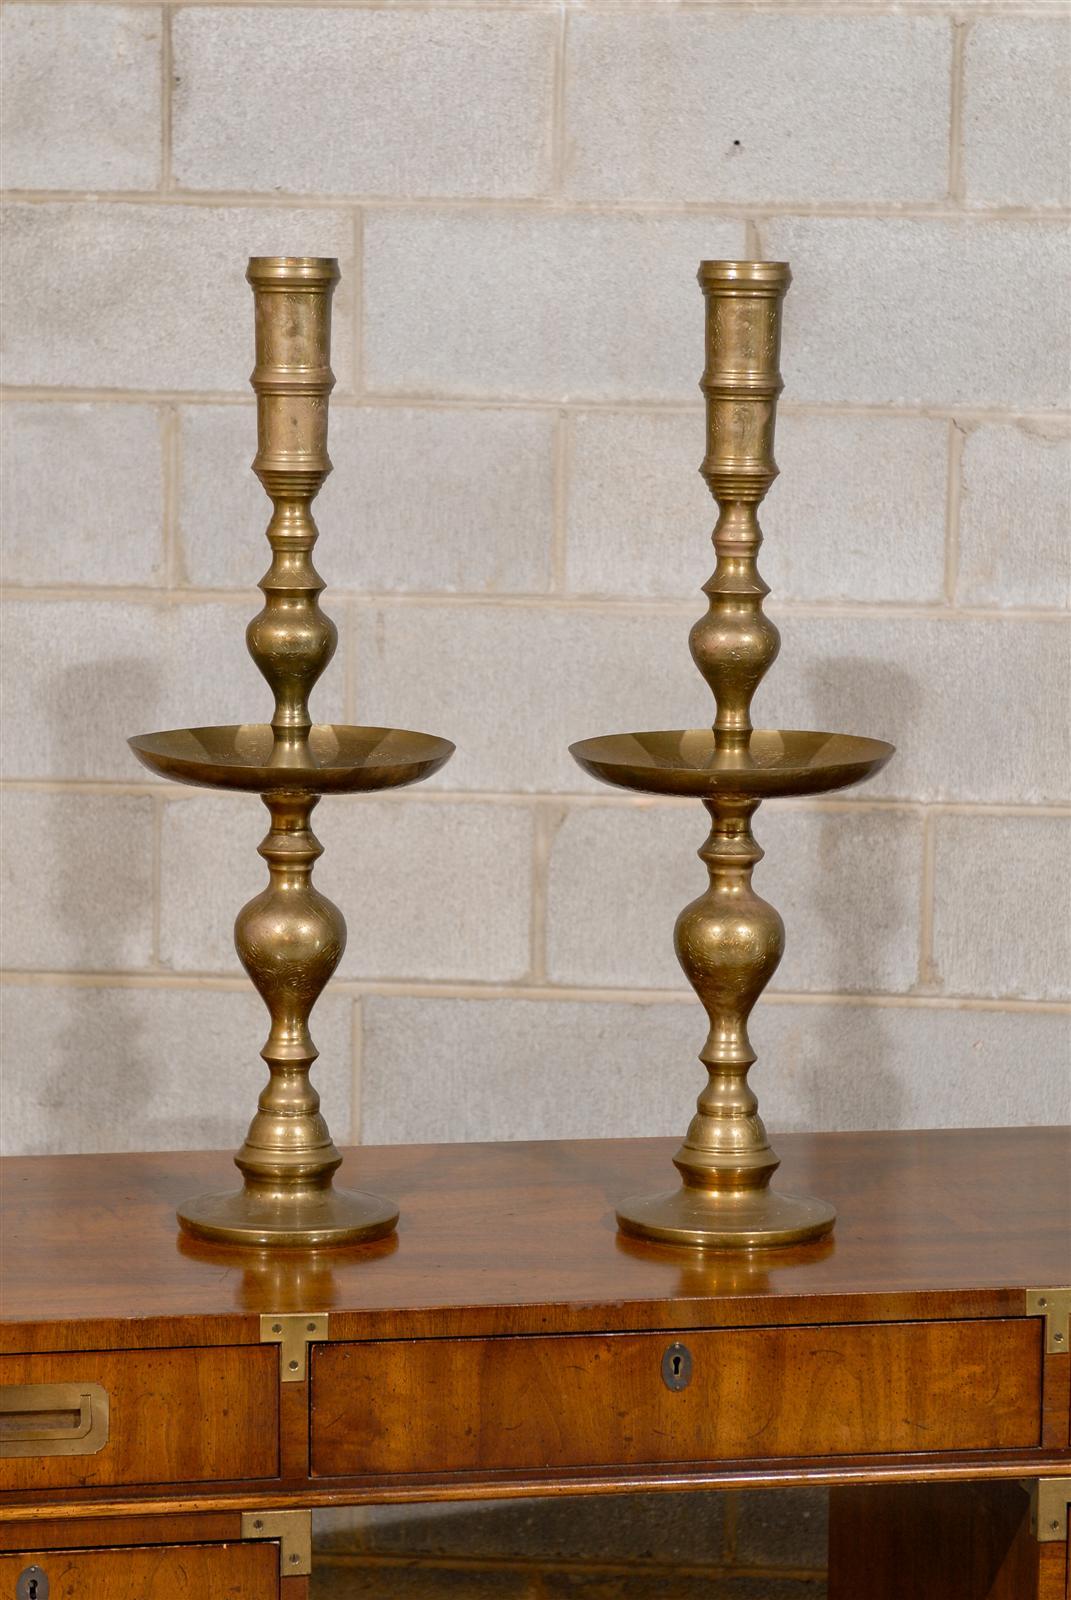 Mid-20th century tall pair of candlesticks of brass and having oversized drip pans.  Made in and stamped Thailand.